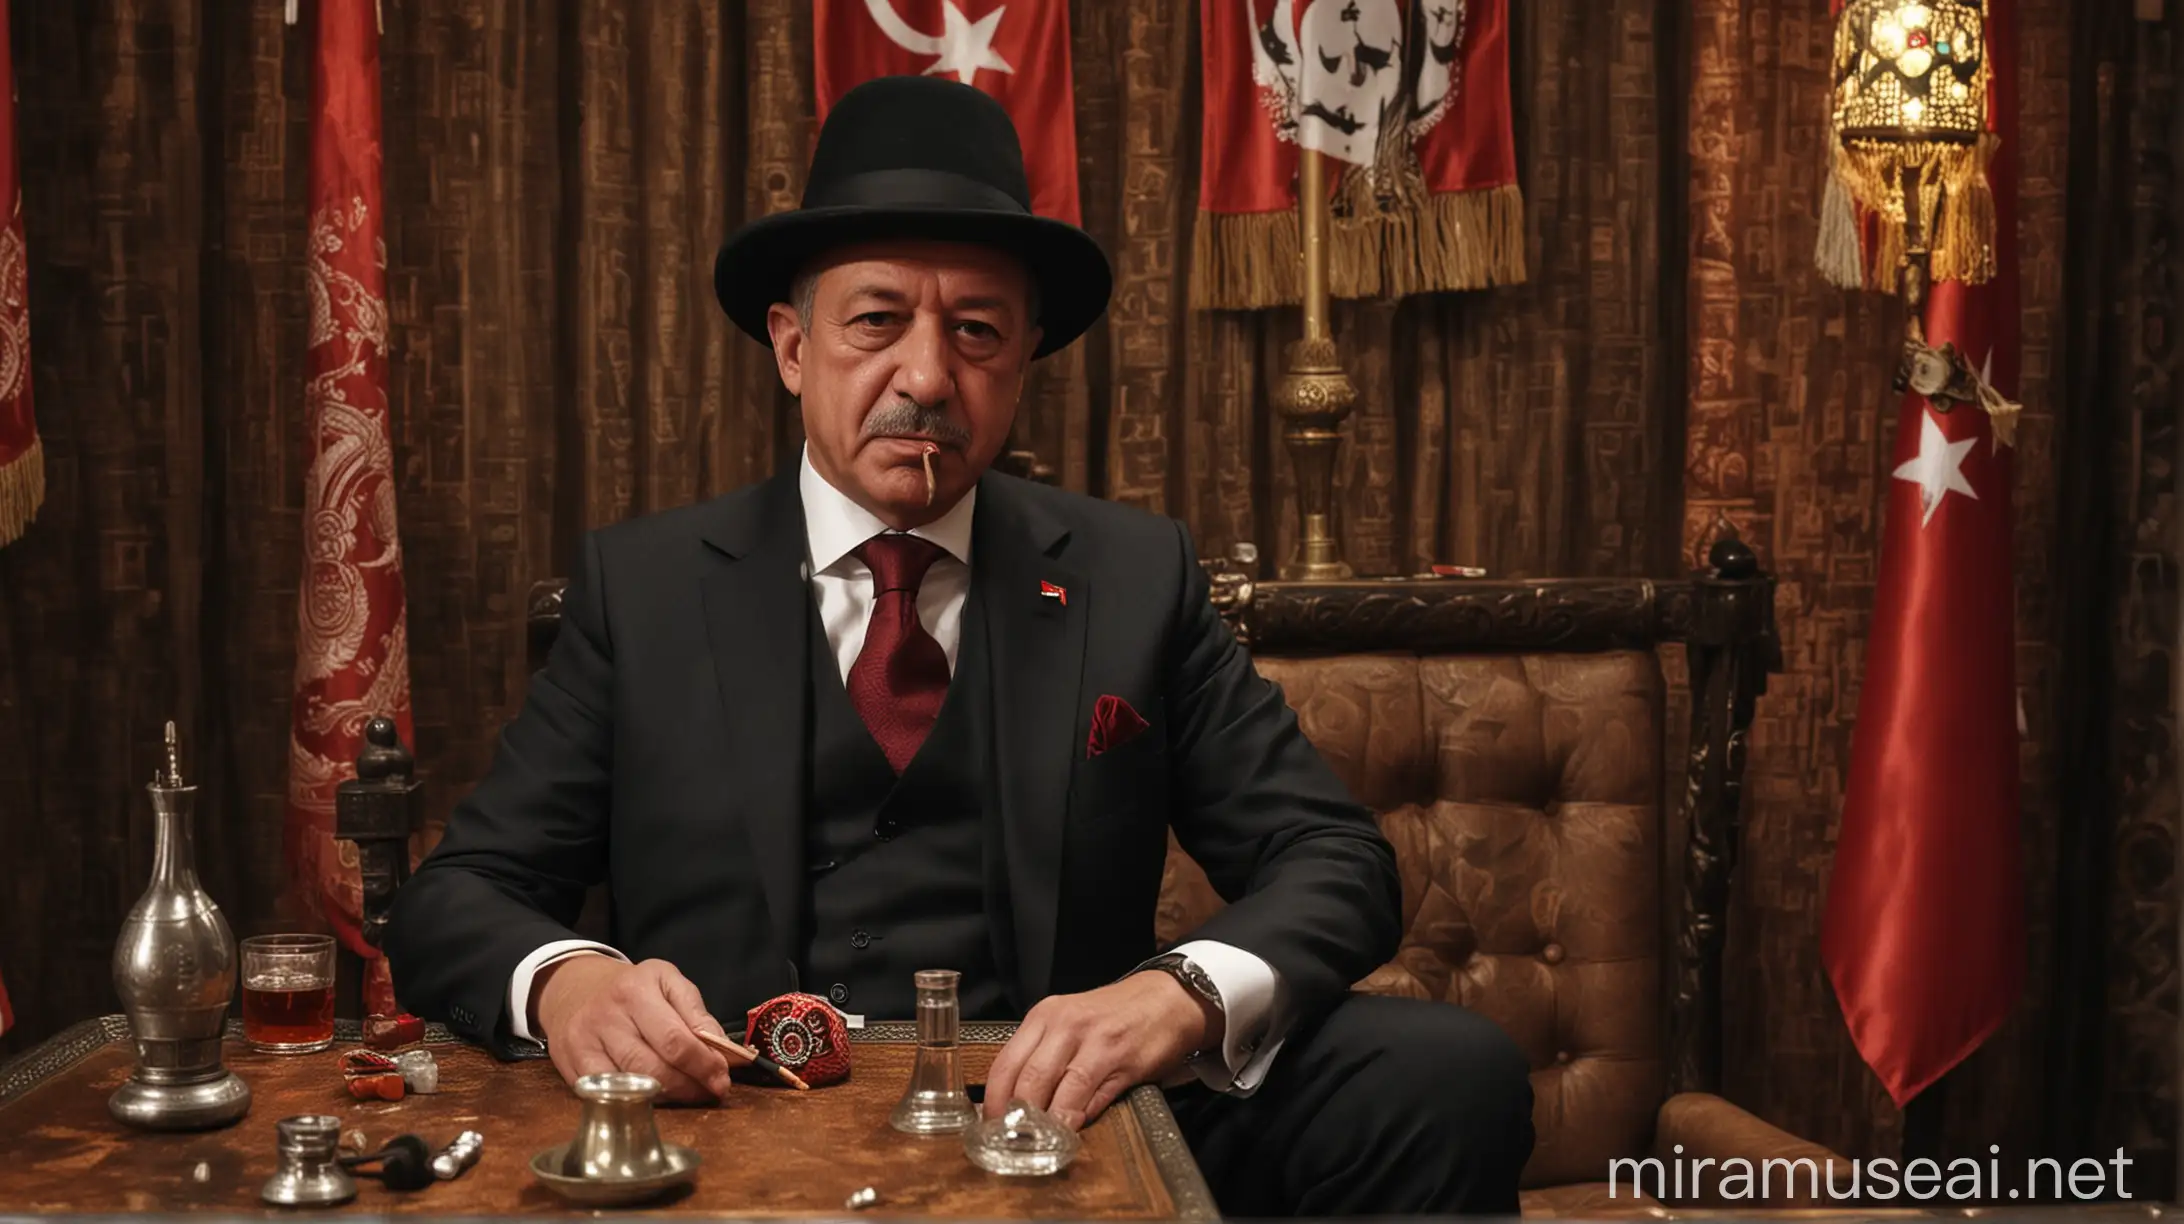 The Turkish president sits in a shisha bar and smokes a cigar. He sits quietly in a suit, and on his head he wears a straw hat with a red band. The Turkish flag is in the background, and on the table there is Turkish tea.